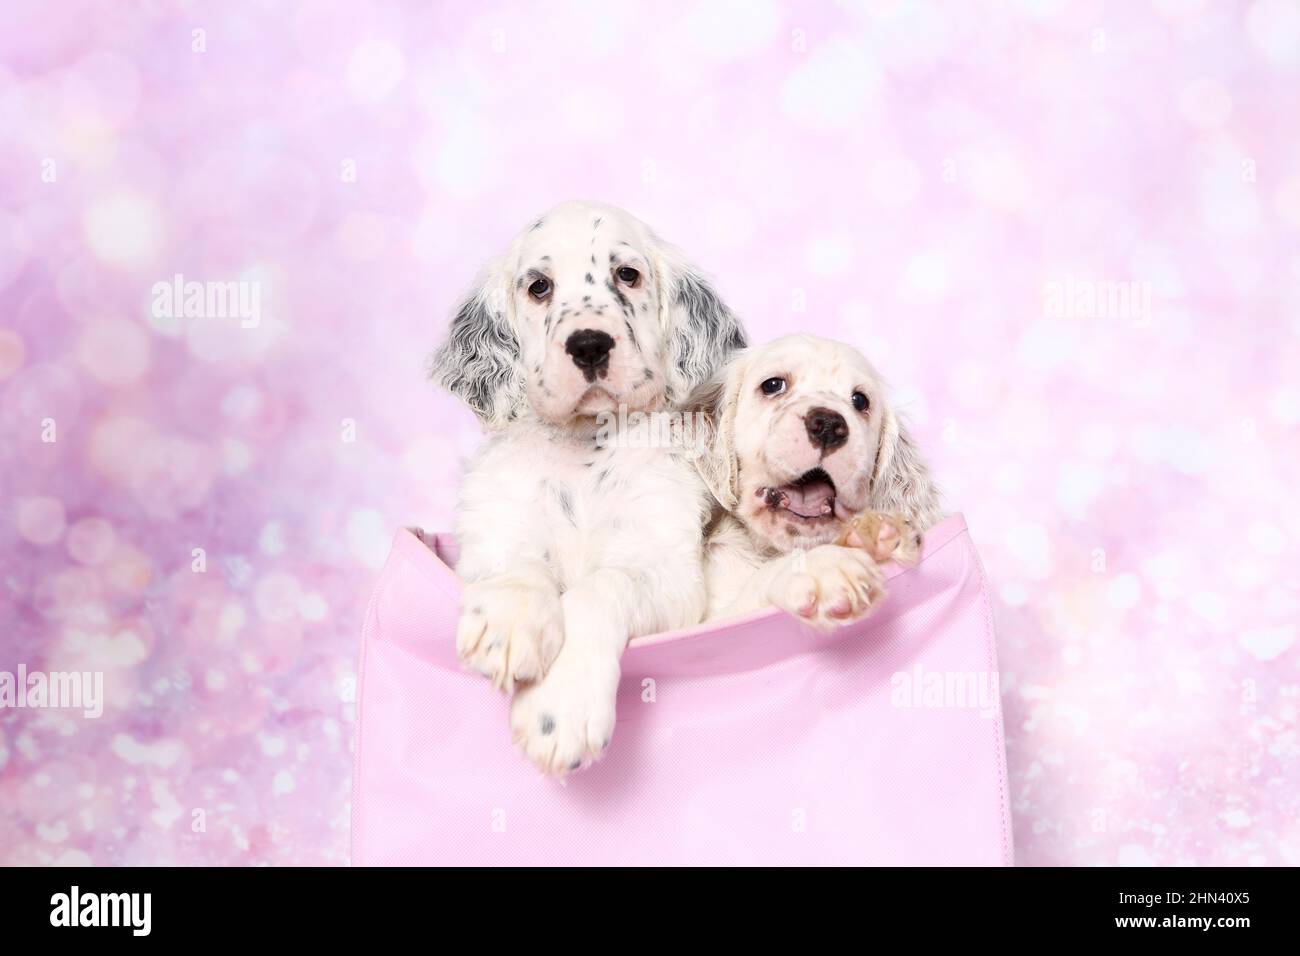 English Setter. Two puppies in a bag, seen against a pink background. Germany Stock Photo